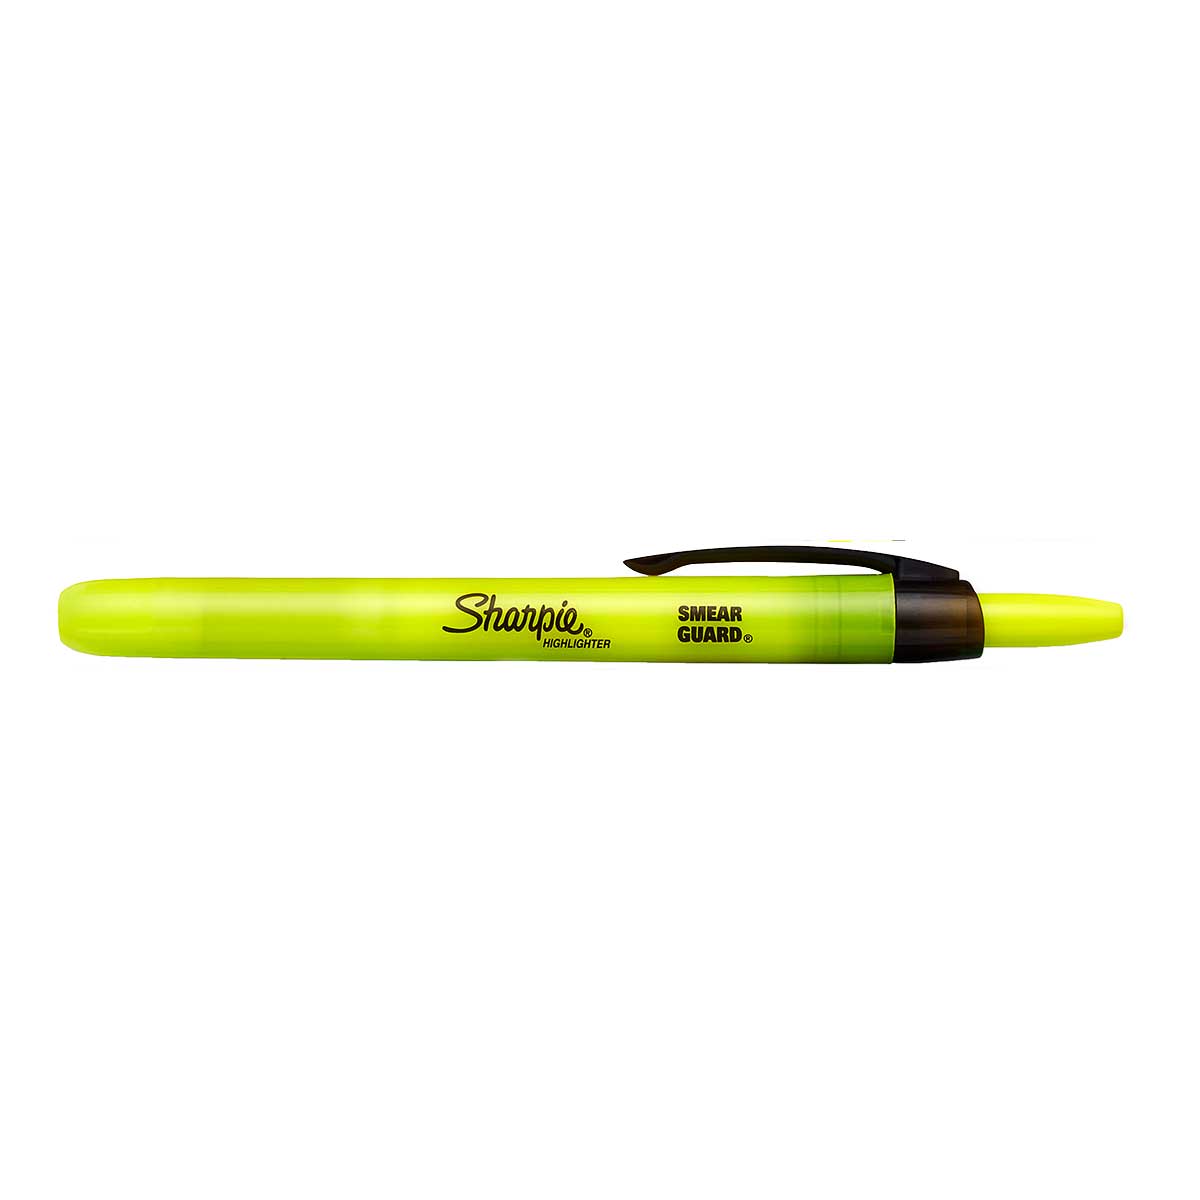 Mr. Pen- Highlighters, Retractable Highlighters - Mr. Pen Store